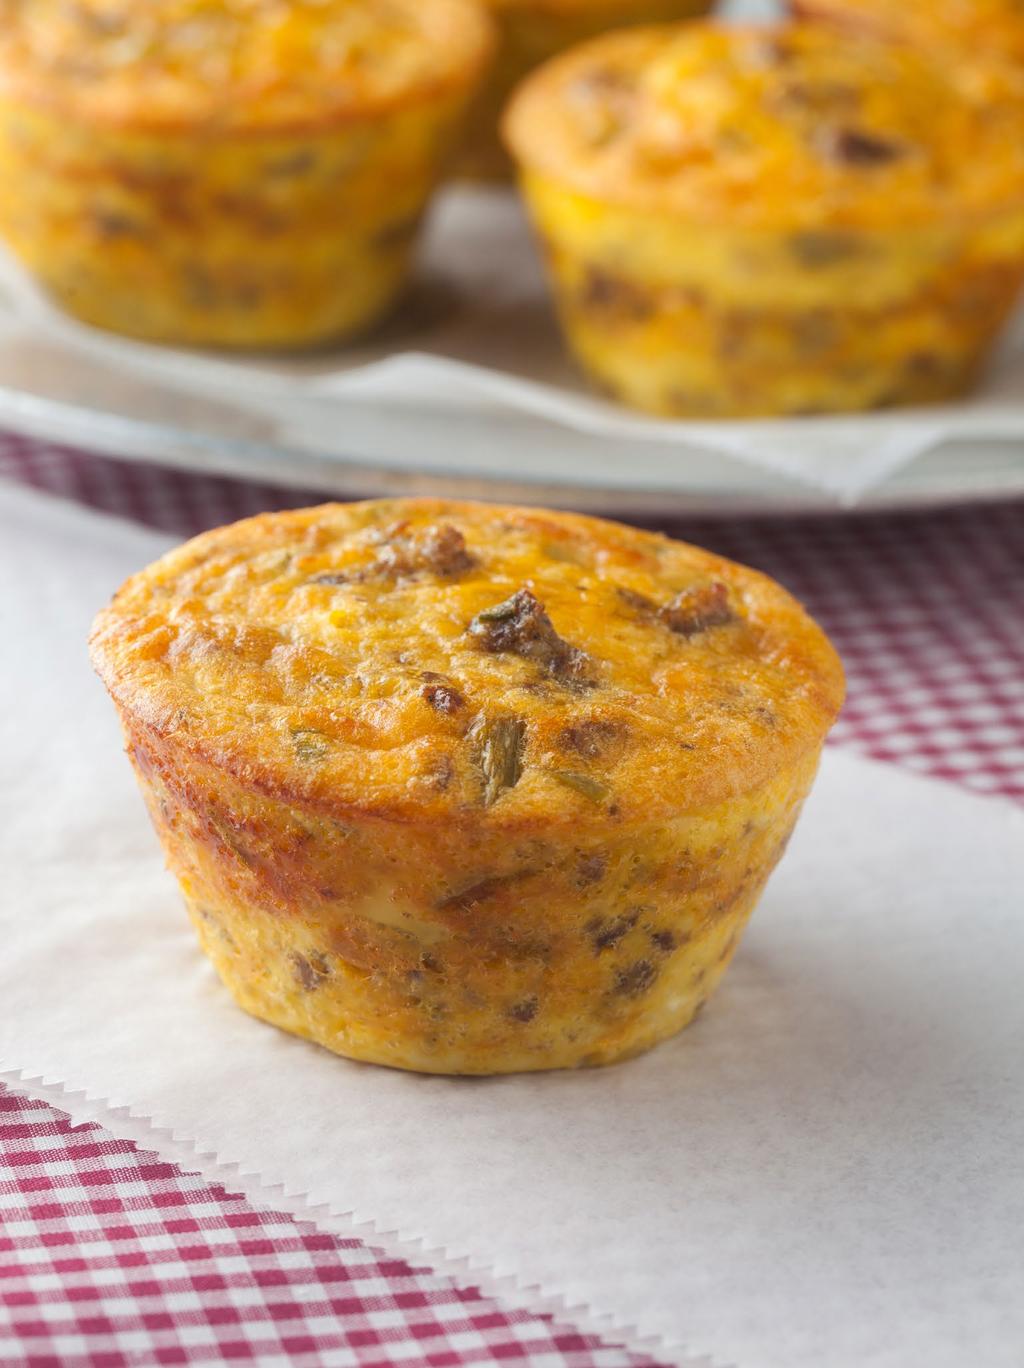 Individual Chipotle Tabasco Cheddar Sausage Frittatas Serves 6 Texas- sized muffin pan sprayed with cooking spray 1 pound bulk breakfast sausage, cooked crumbled and drained on paper towels 2/3 cup